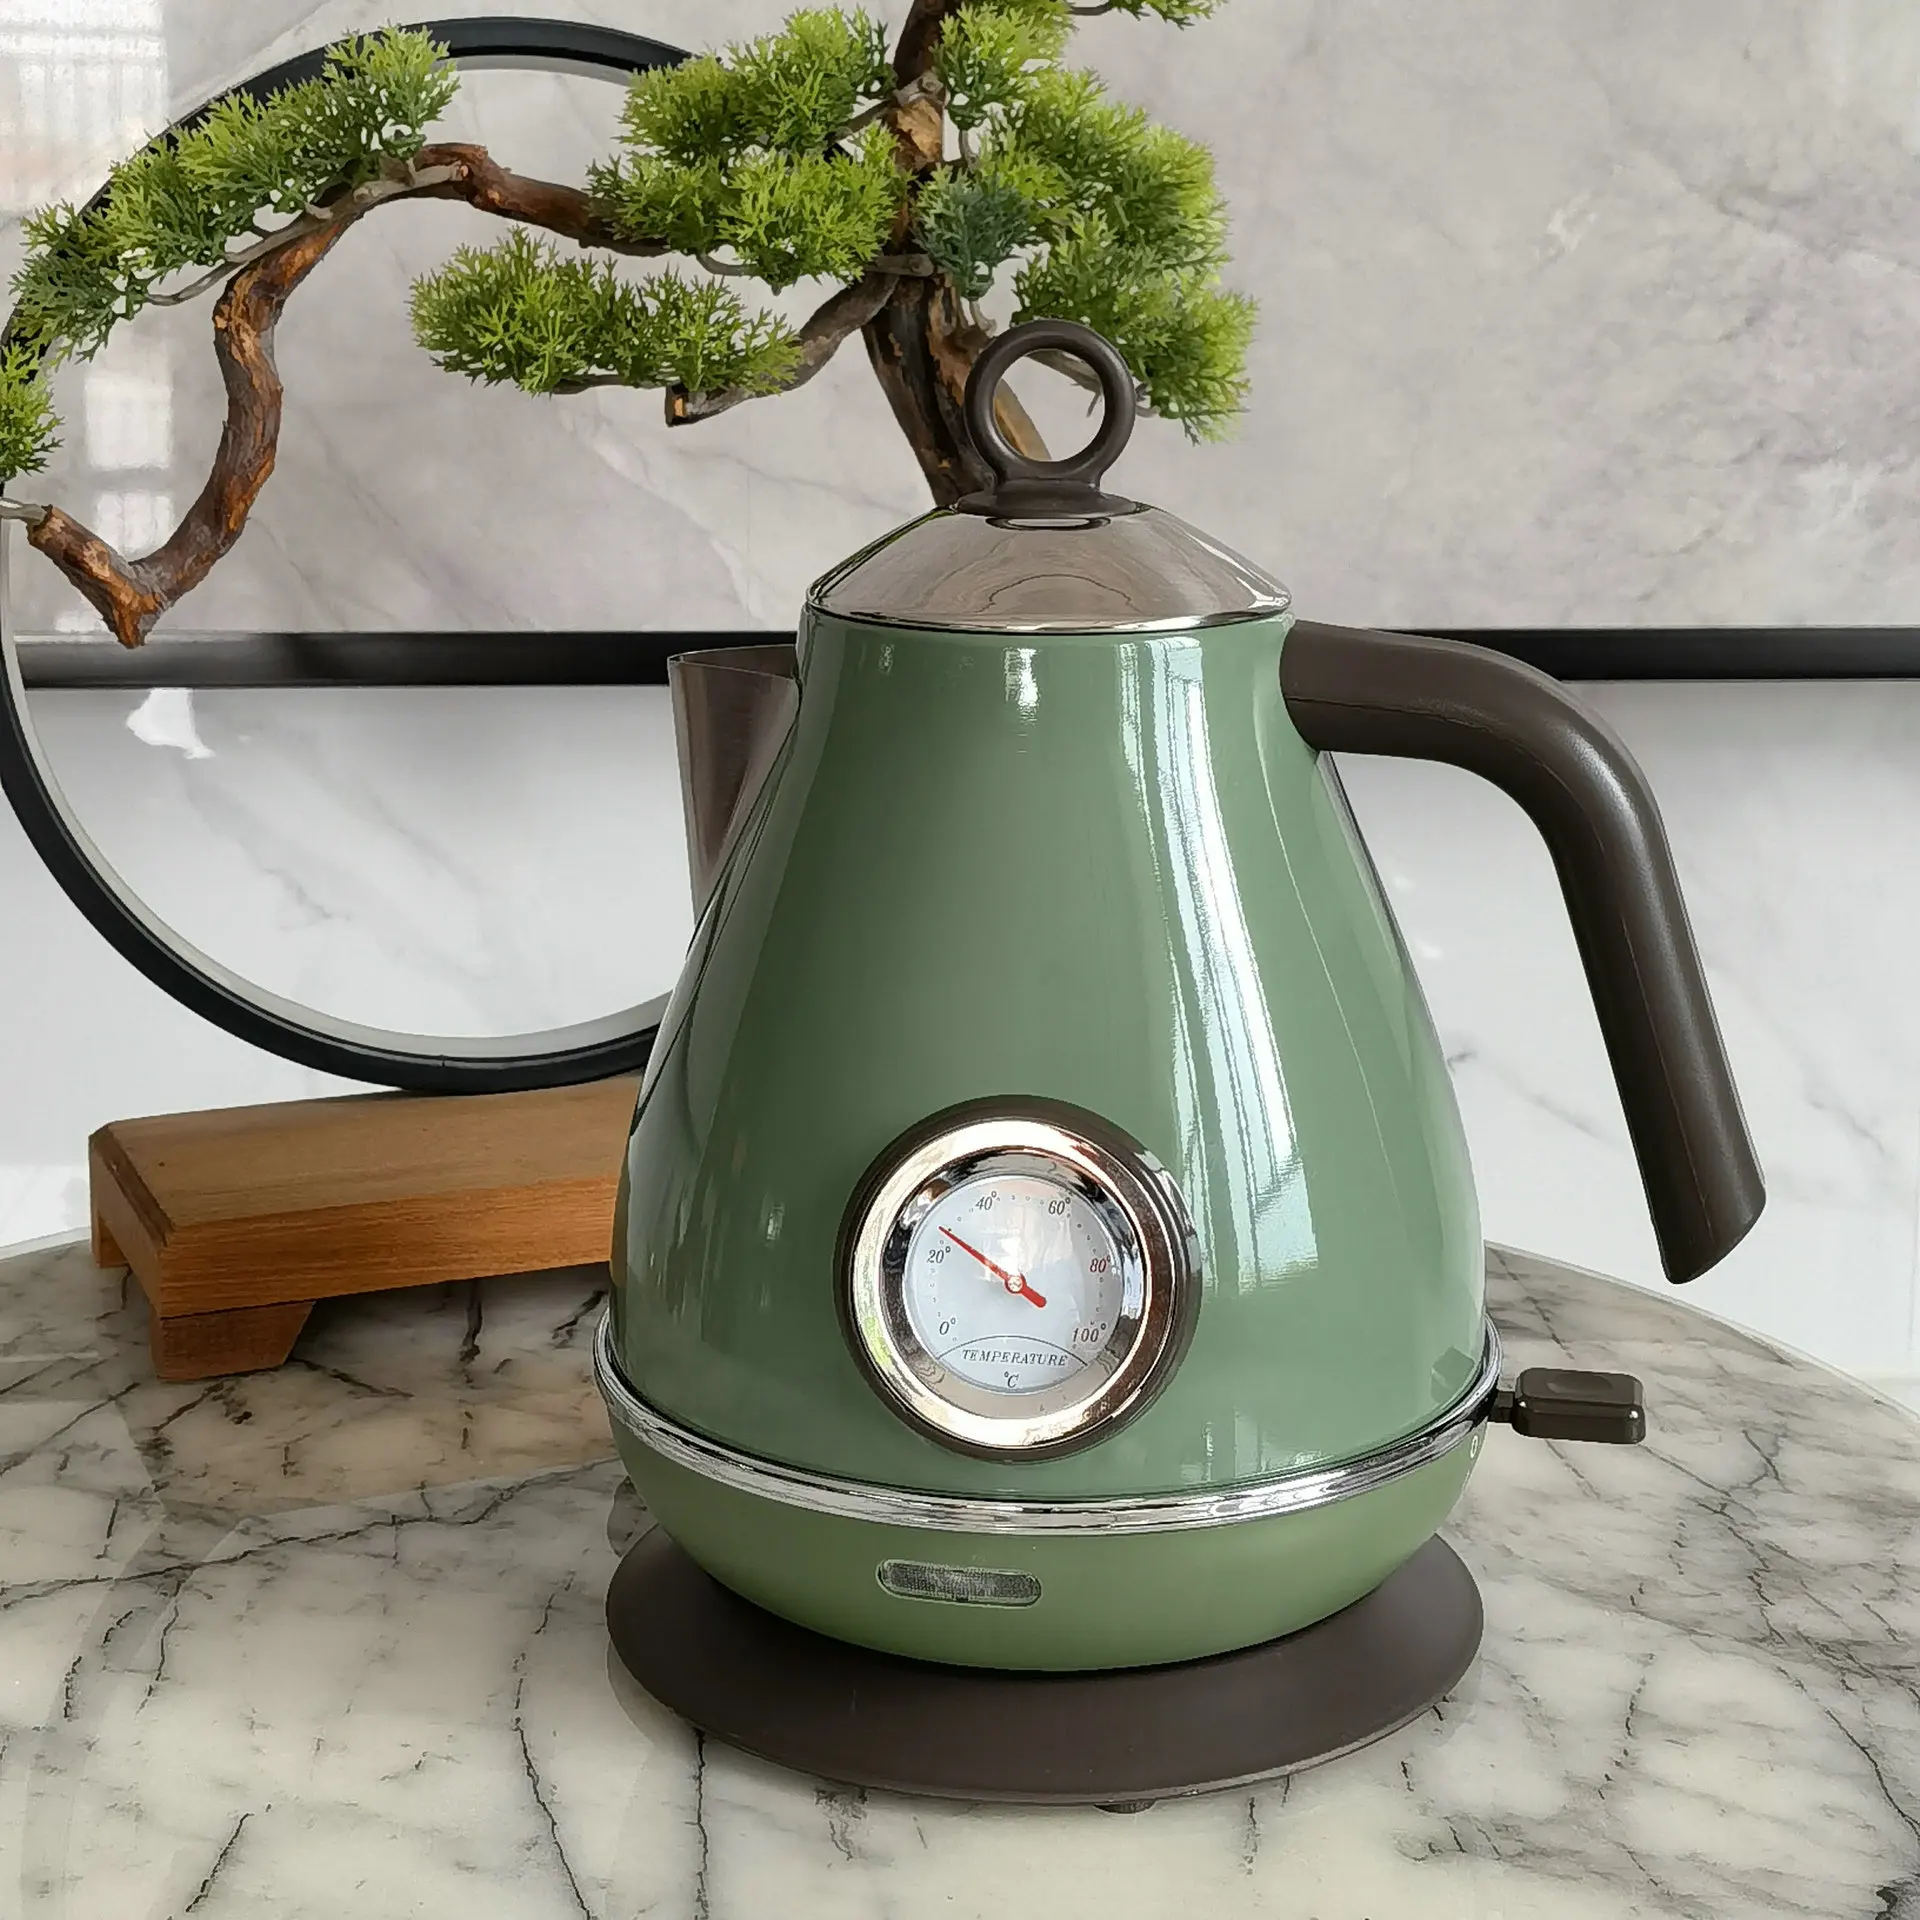 Stainless Steel Retro Paint with Temperature Display Electric Kettle Utility Model Patent Hot Water Boiler welly 1 18 bya qiao 2014 vespa 946 scooter simulation alloy motorcycle model simulation alloy model retro motorcycle kids gifts